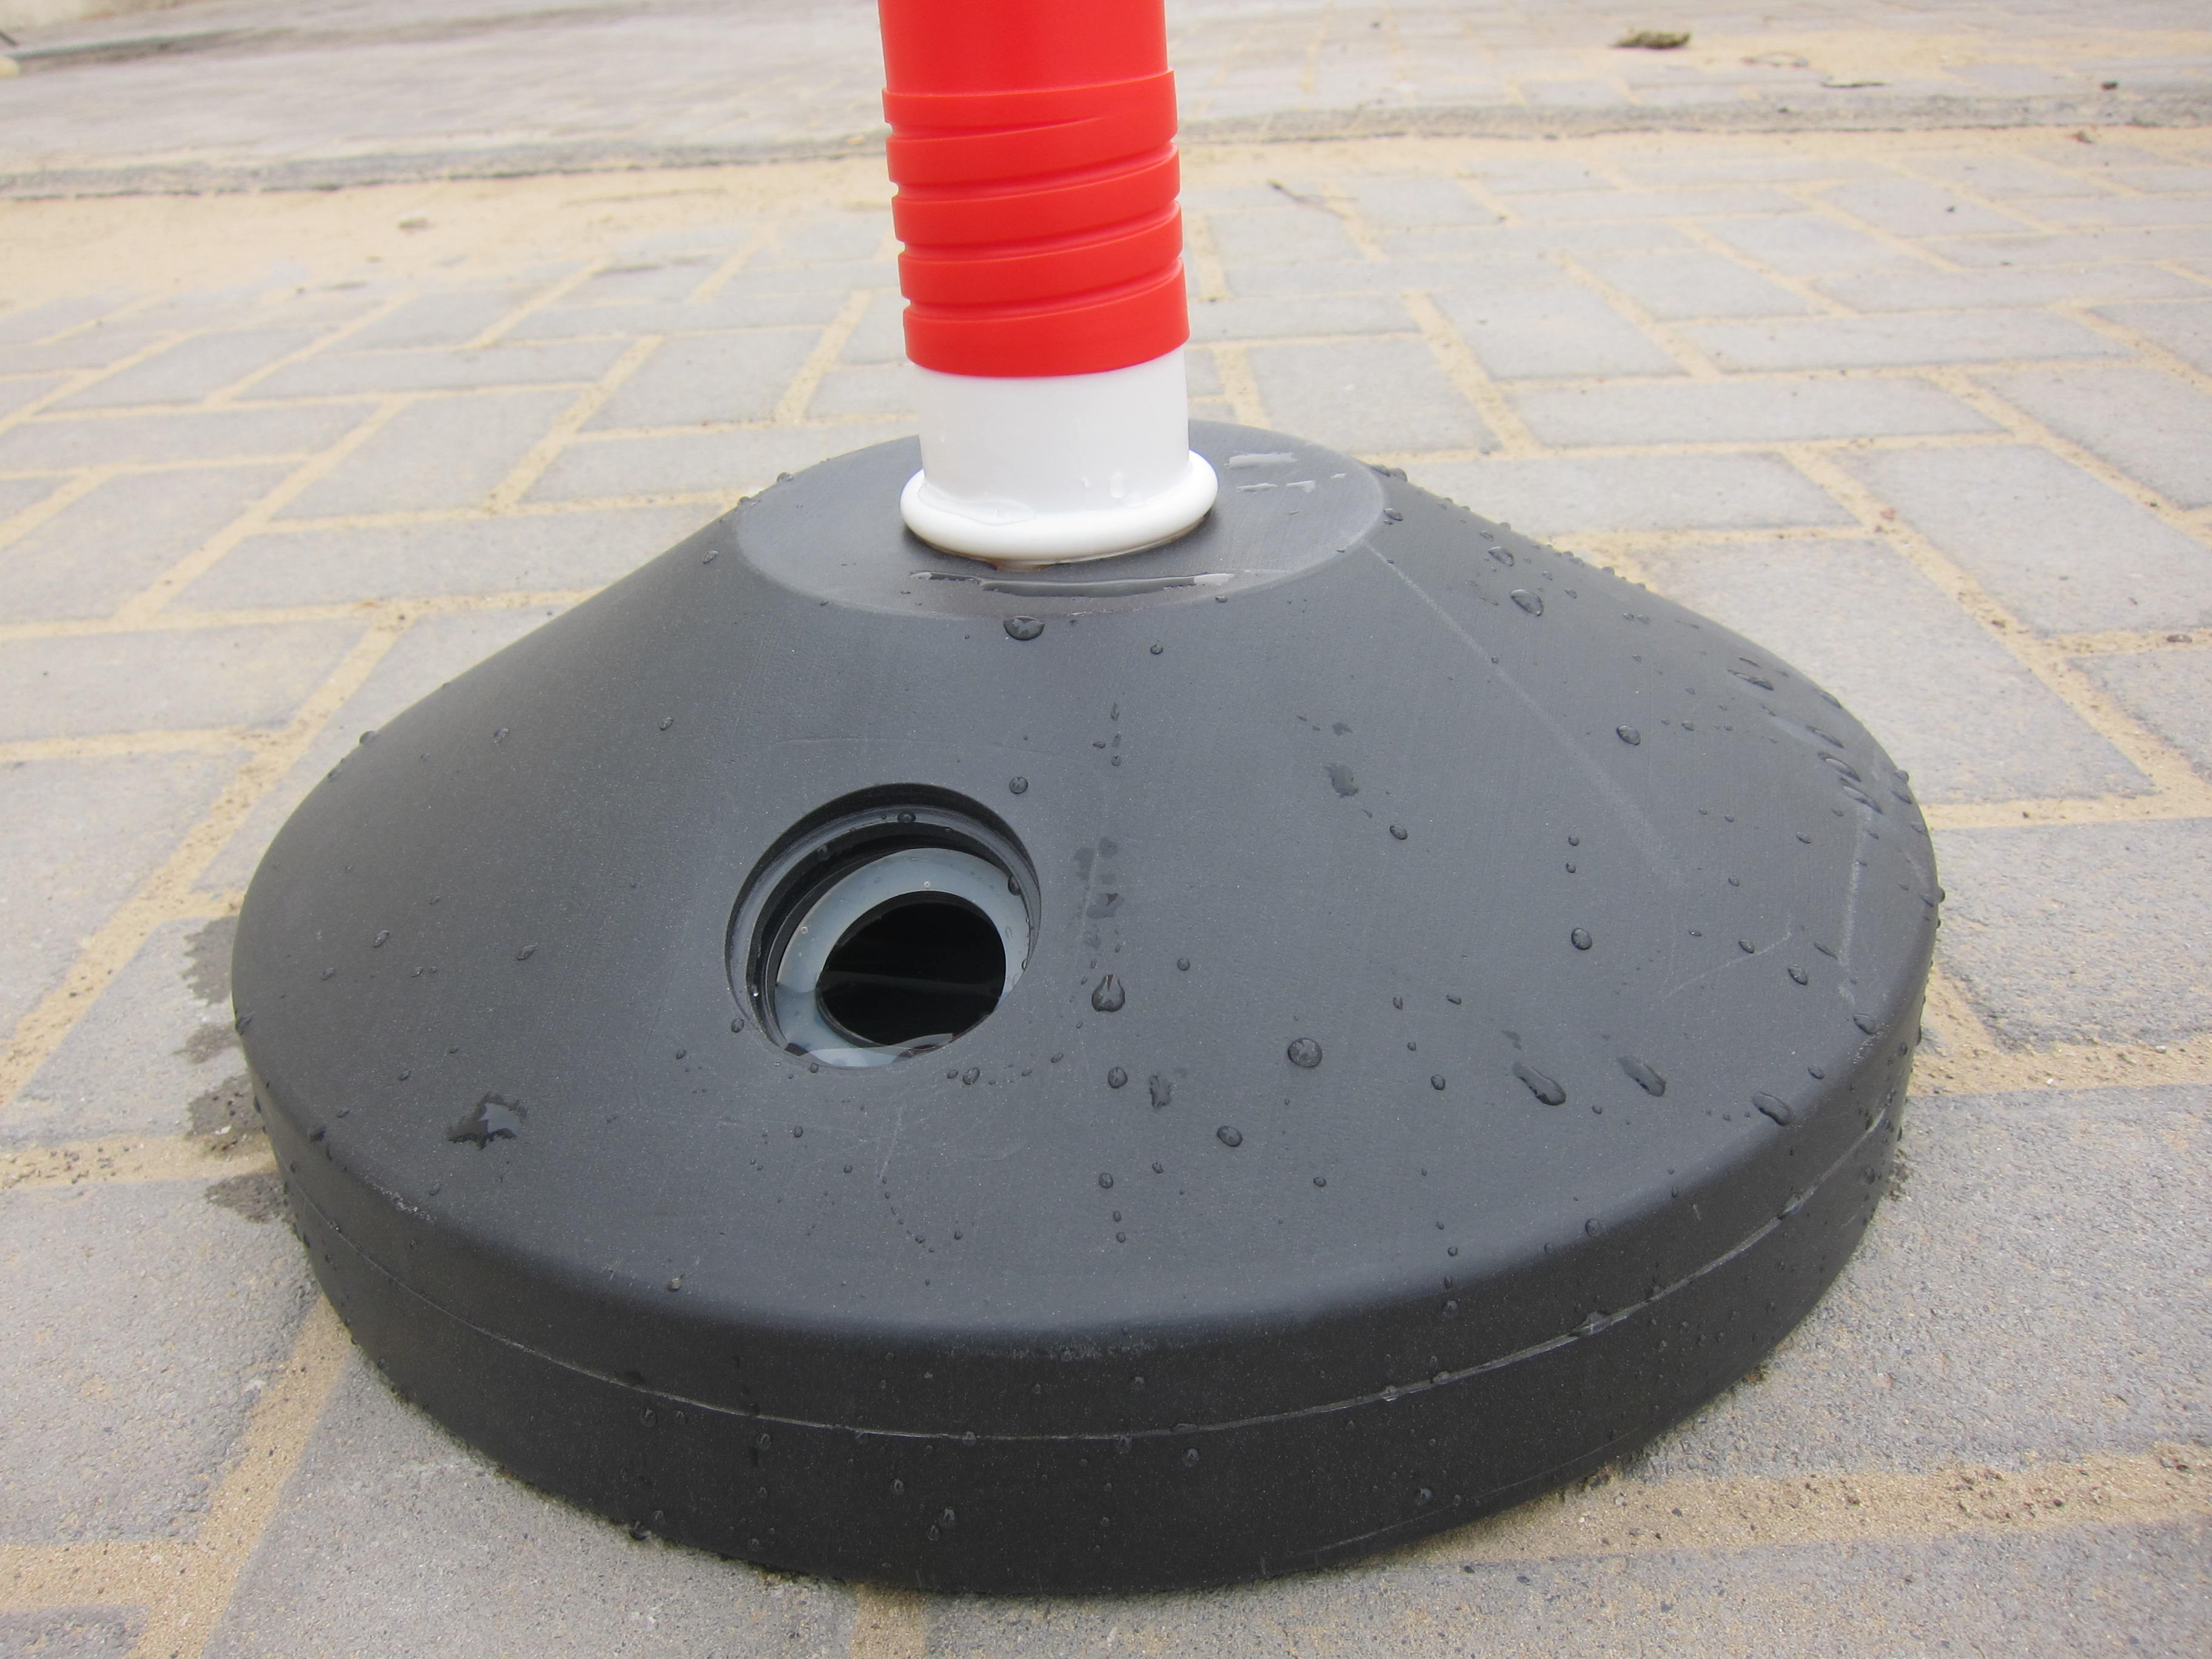 LC03 100CM PVC Cylinder Dia 4CM - PVC Cylinder with 4CM Diameter(Traffic Cylinders For Delineation Of Road Traffic)